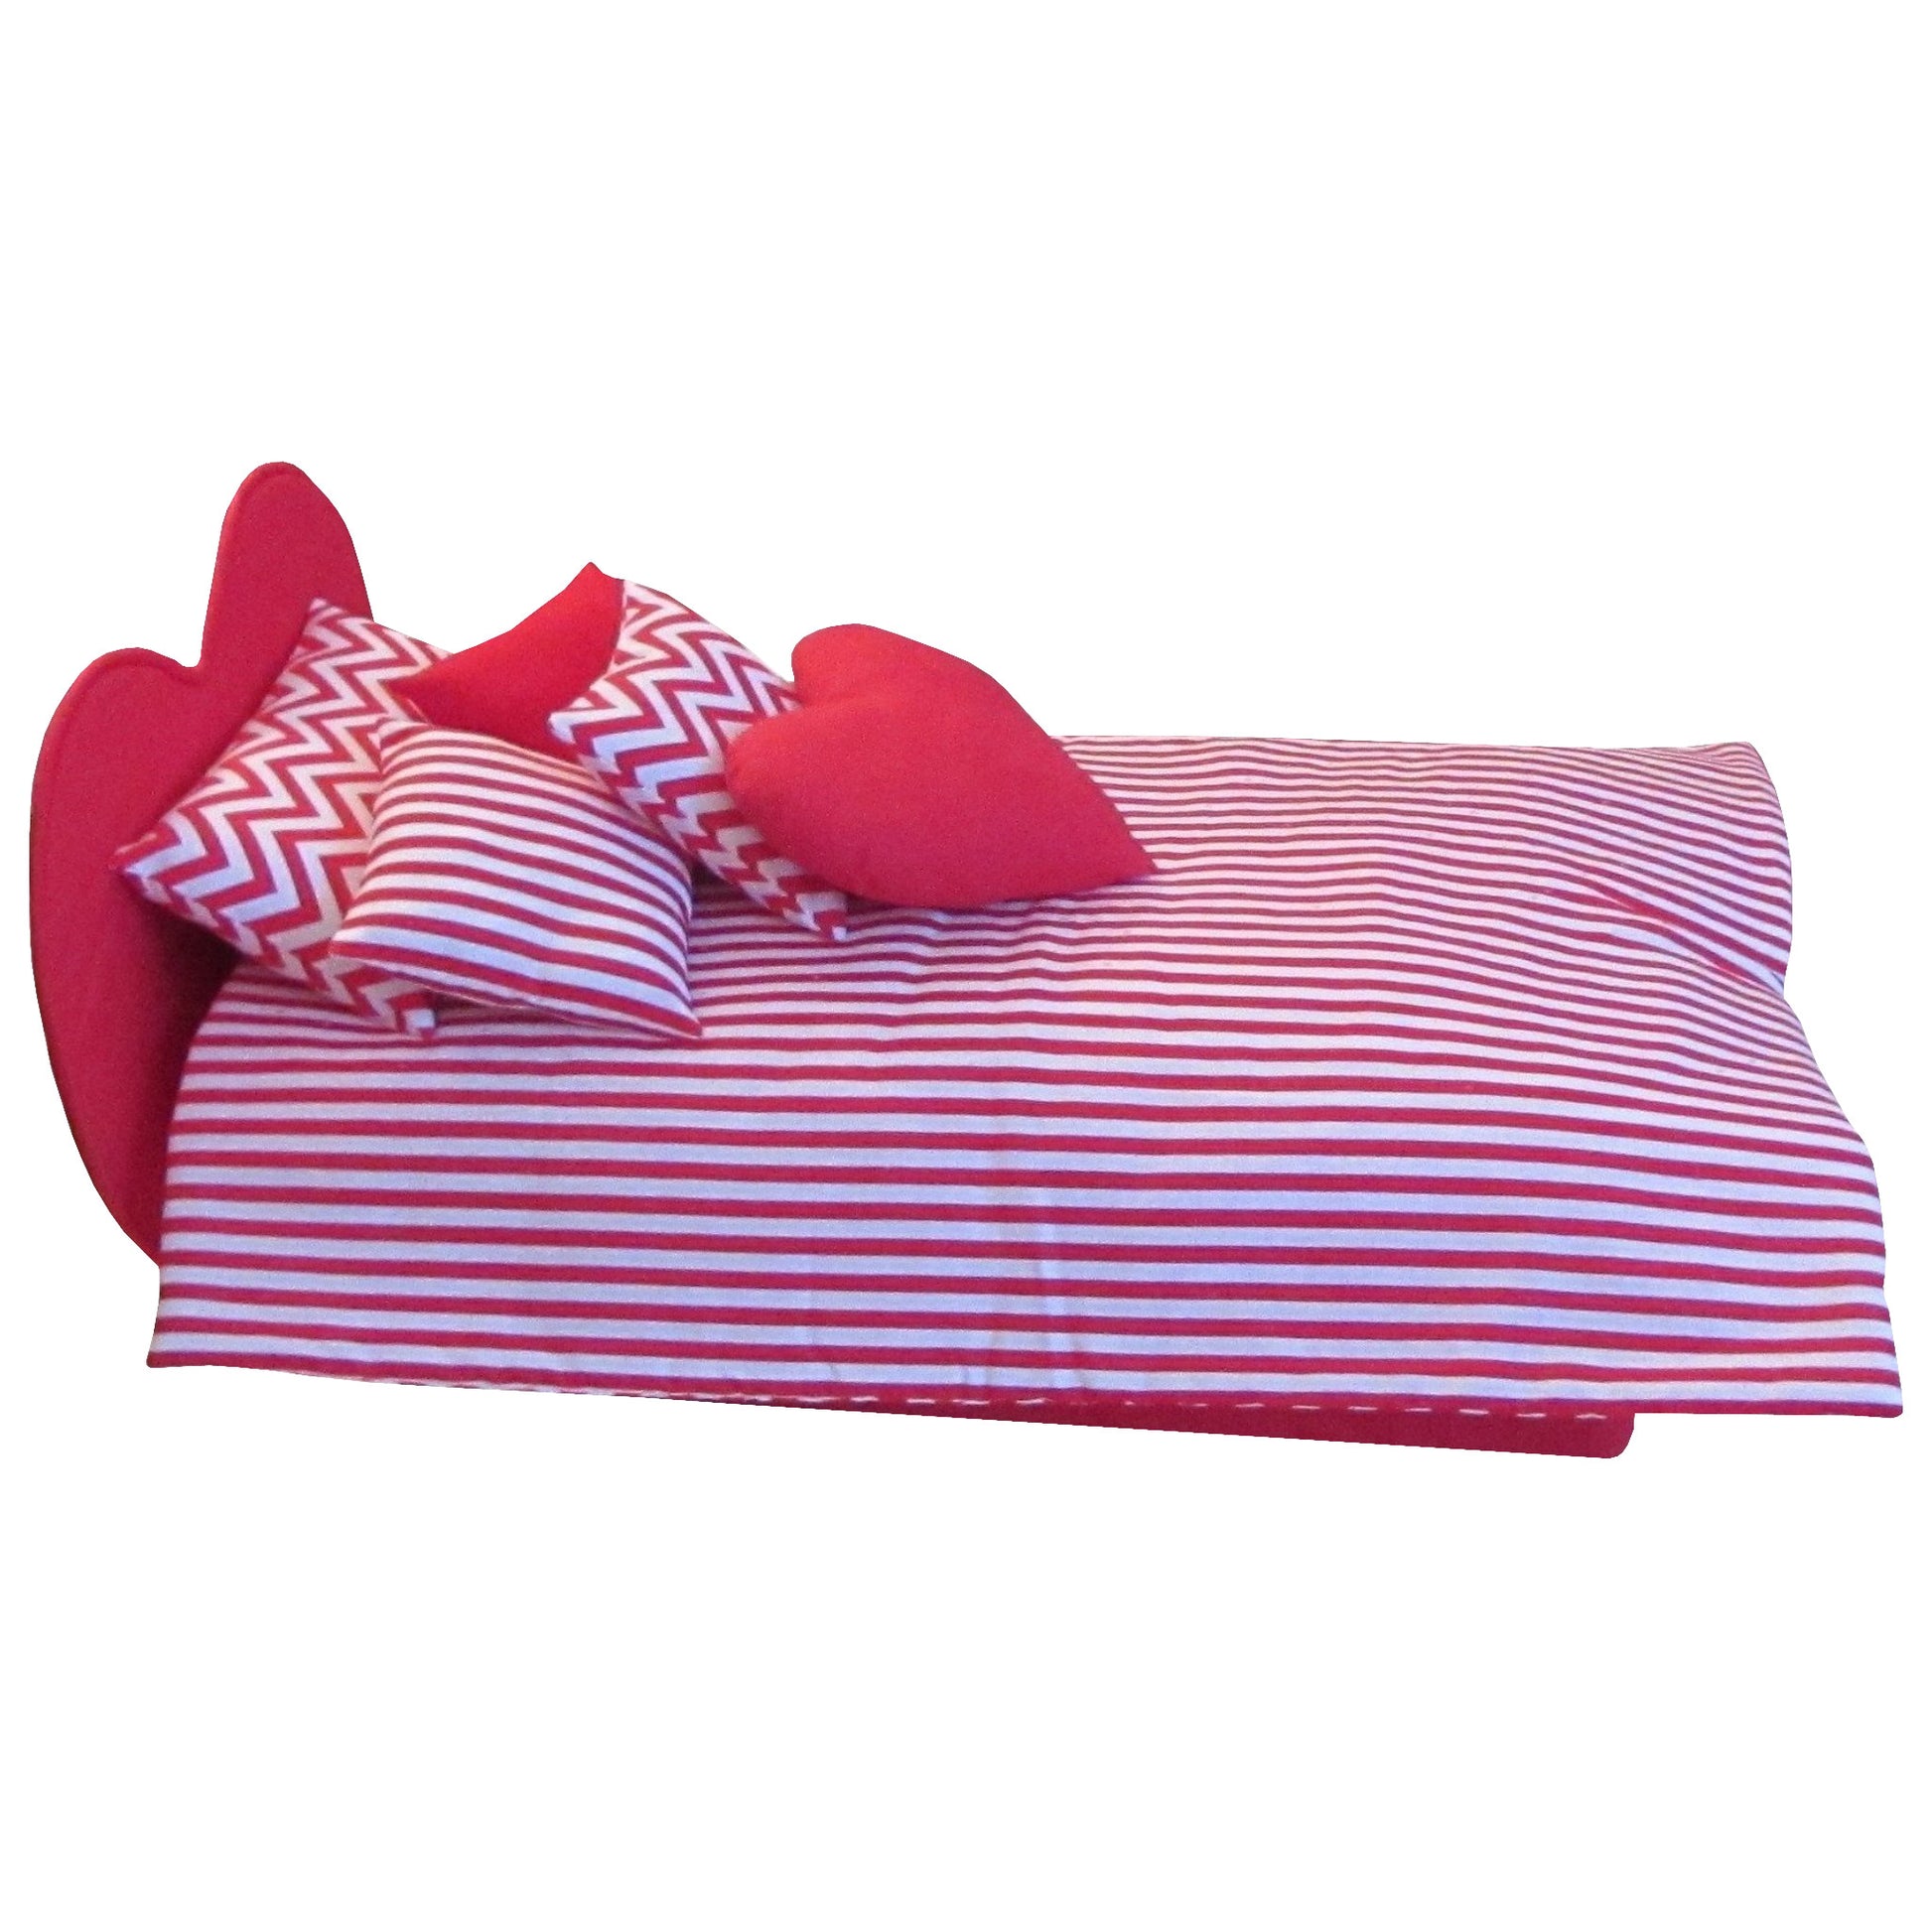 Red and White Stripes Doll Comforter Set and Red Heart Upholstered Doll Bed for 18-inch dolls